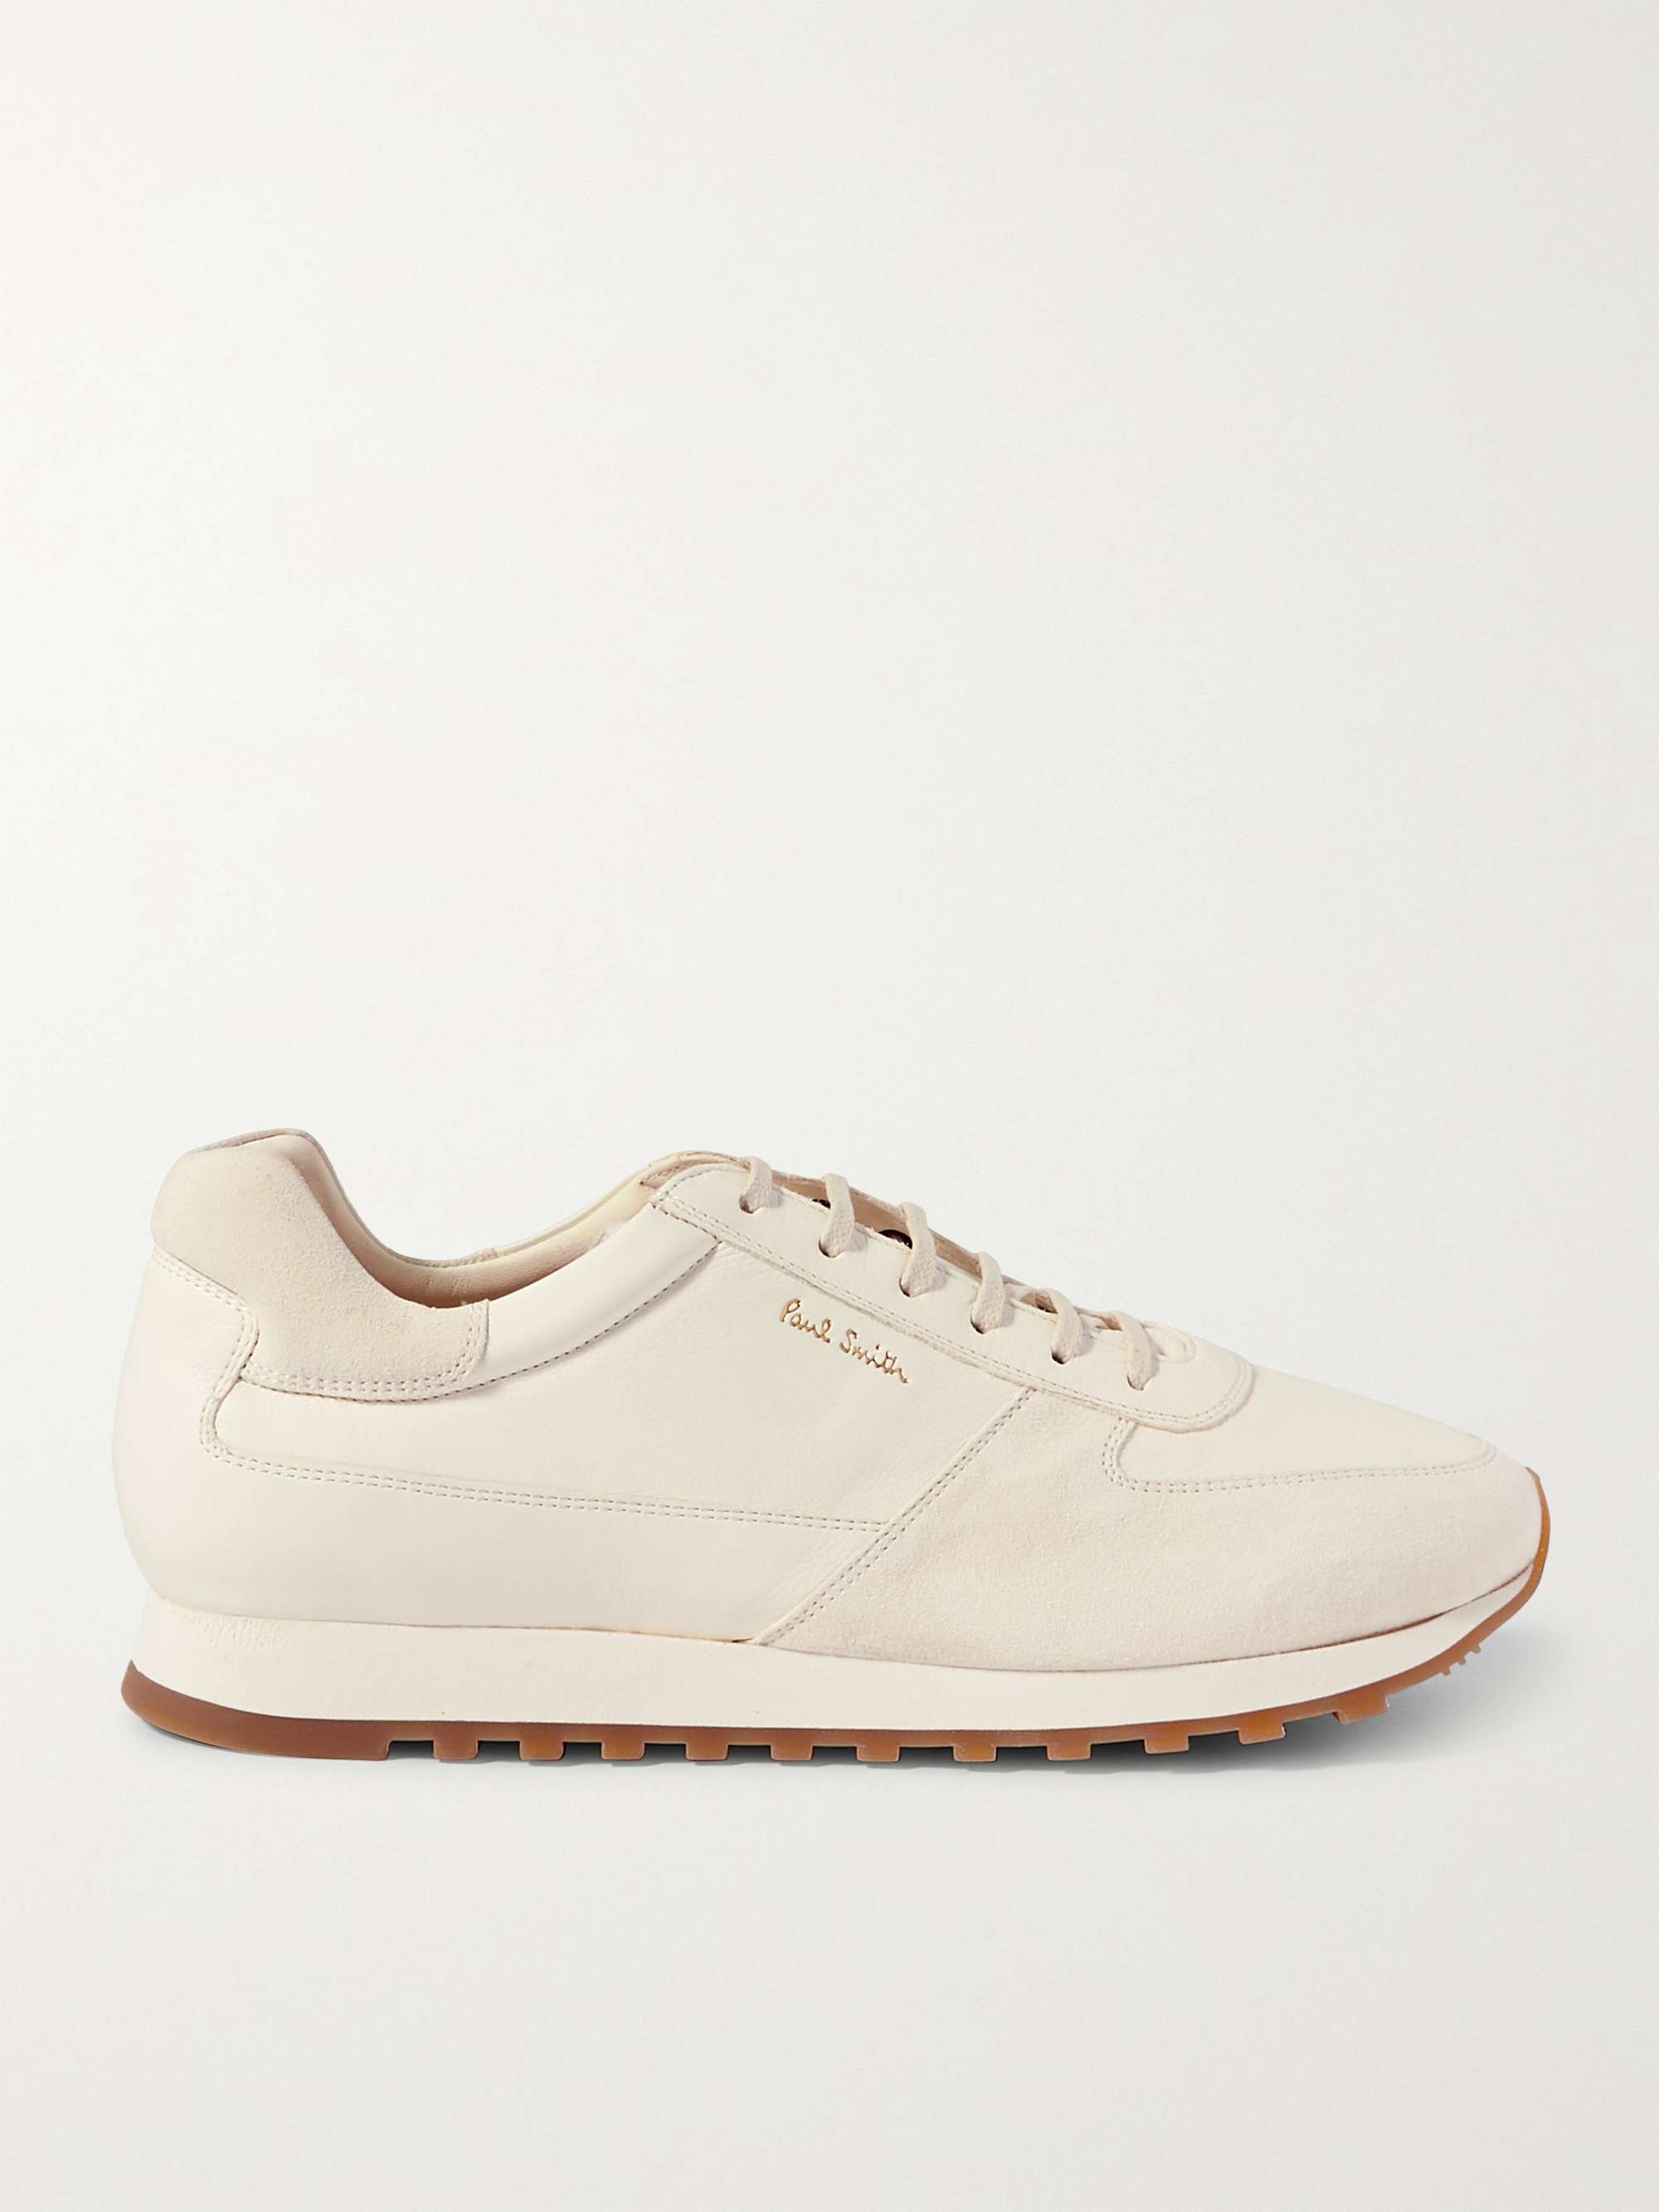 PAUL SMITH Velo Suede and Full-Grain Leather Sneakers